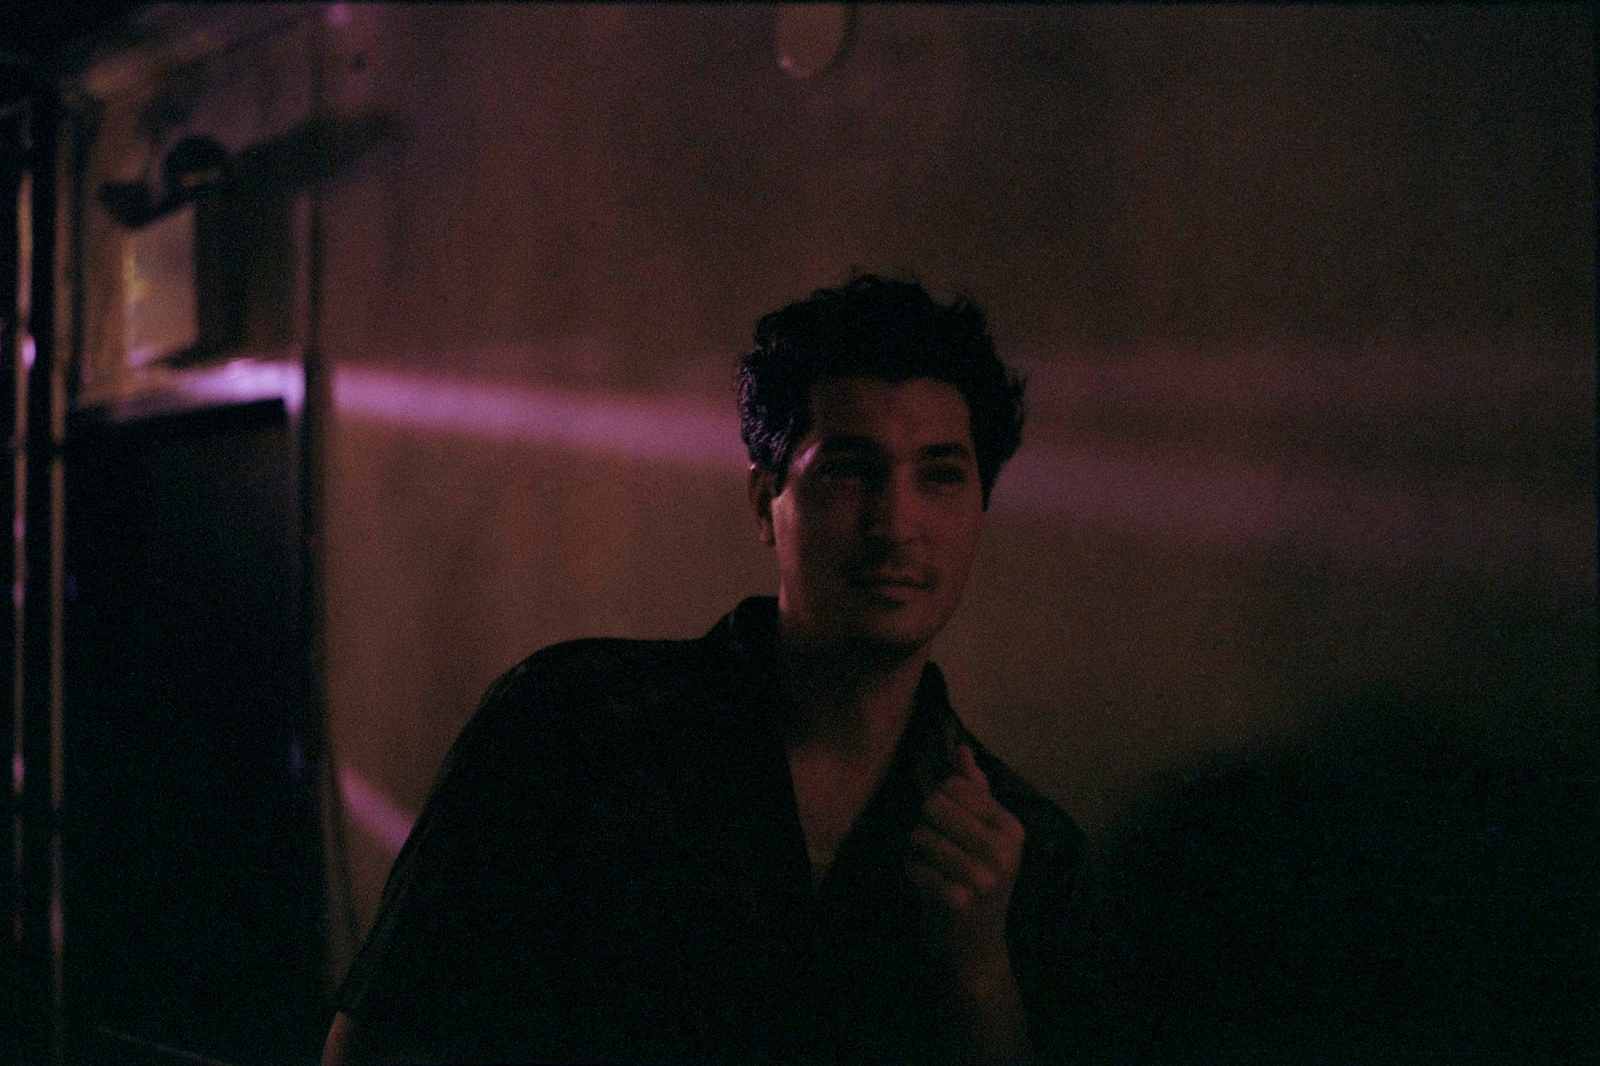 Malcolm after a show, Brooklyn, NY